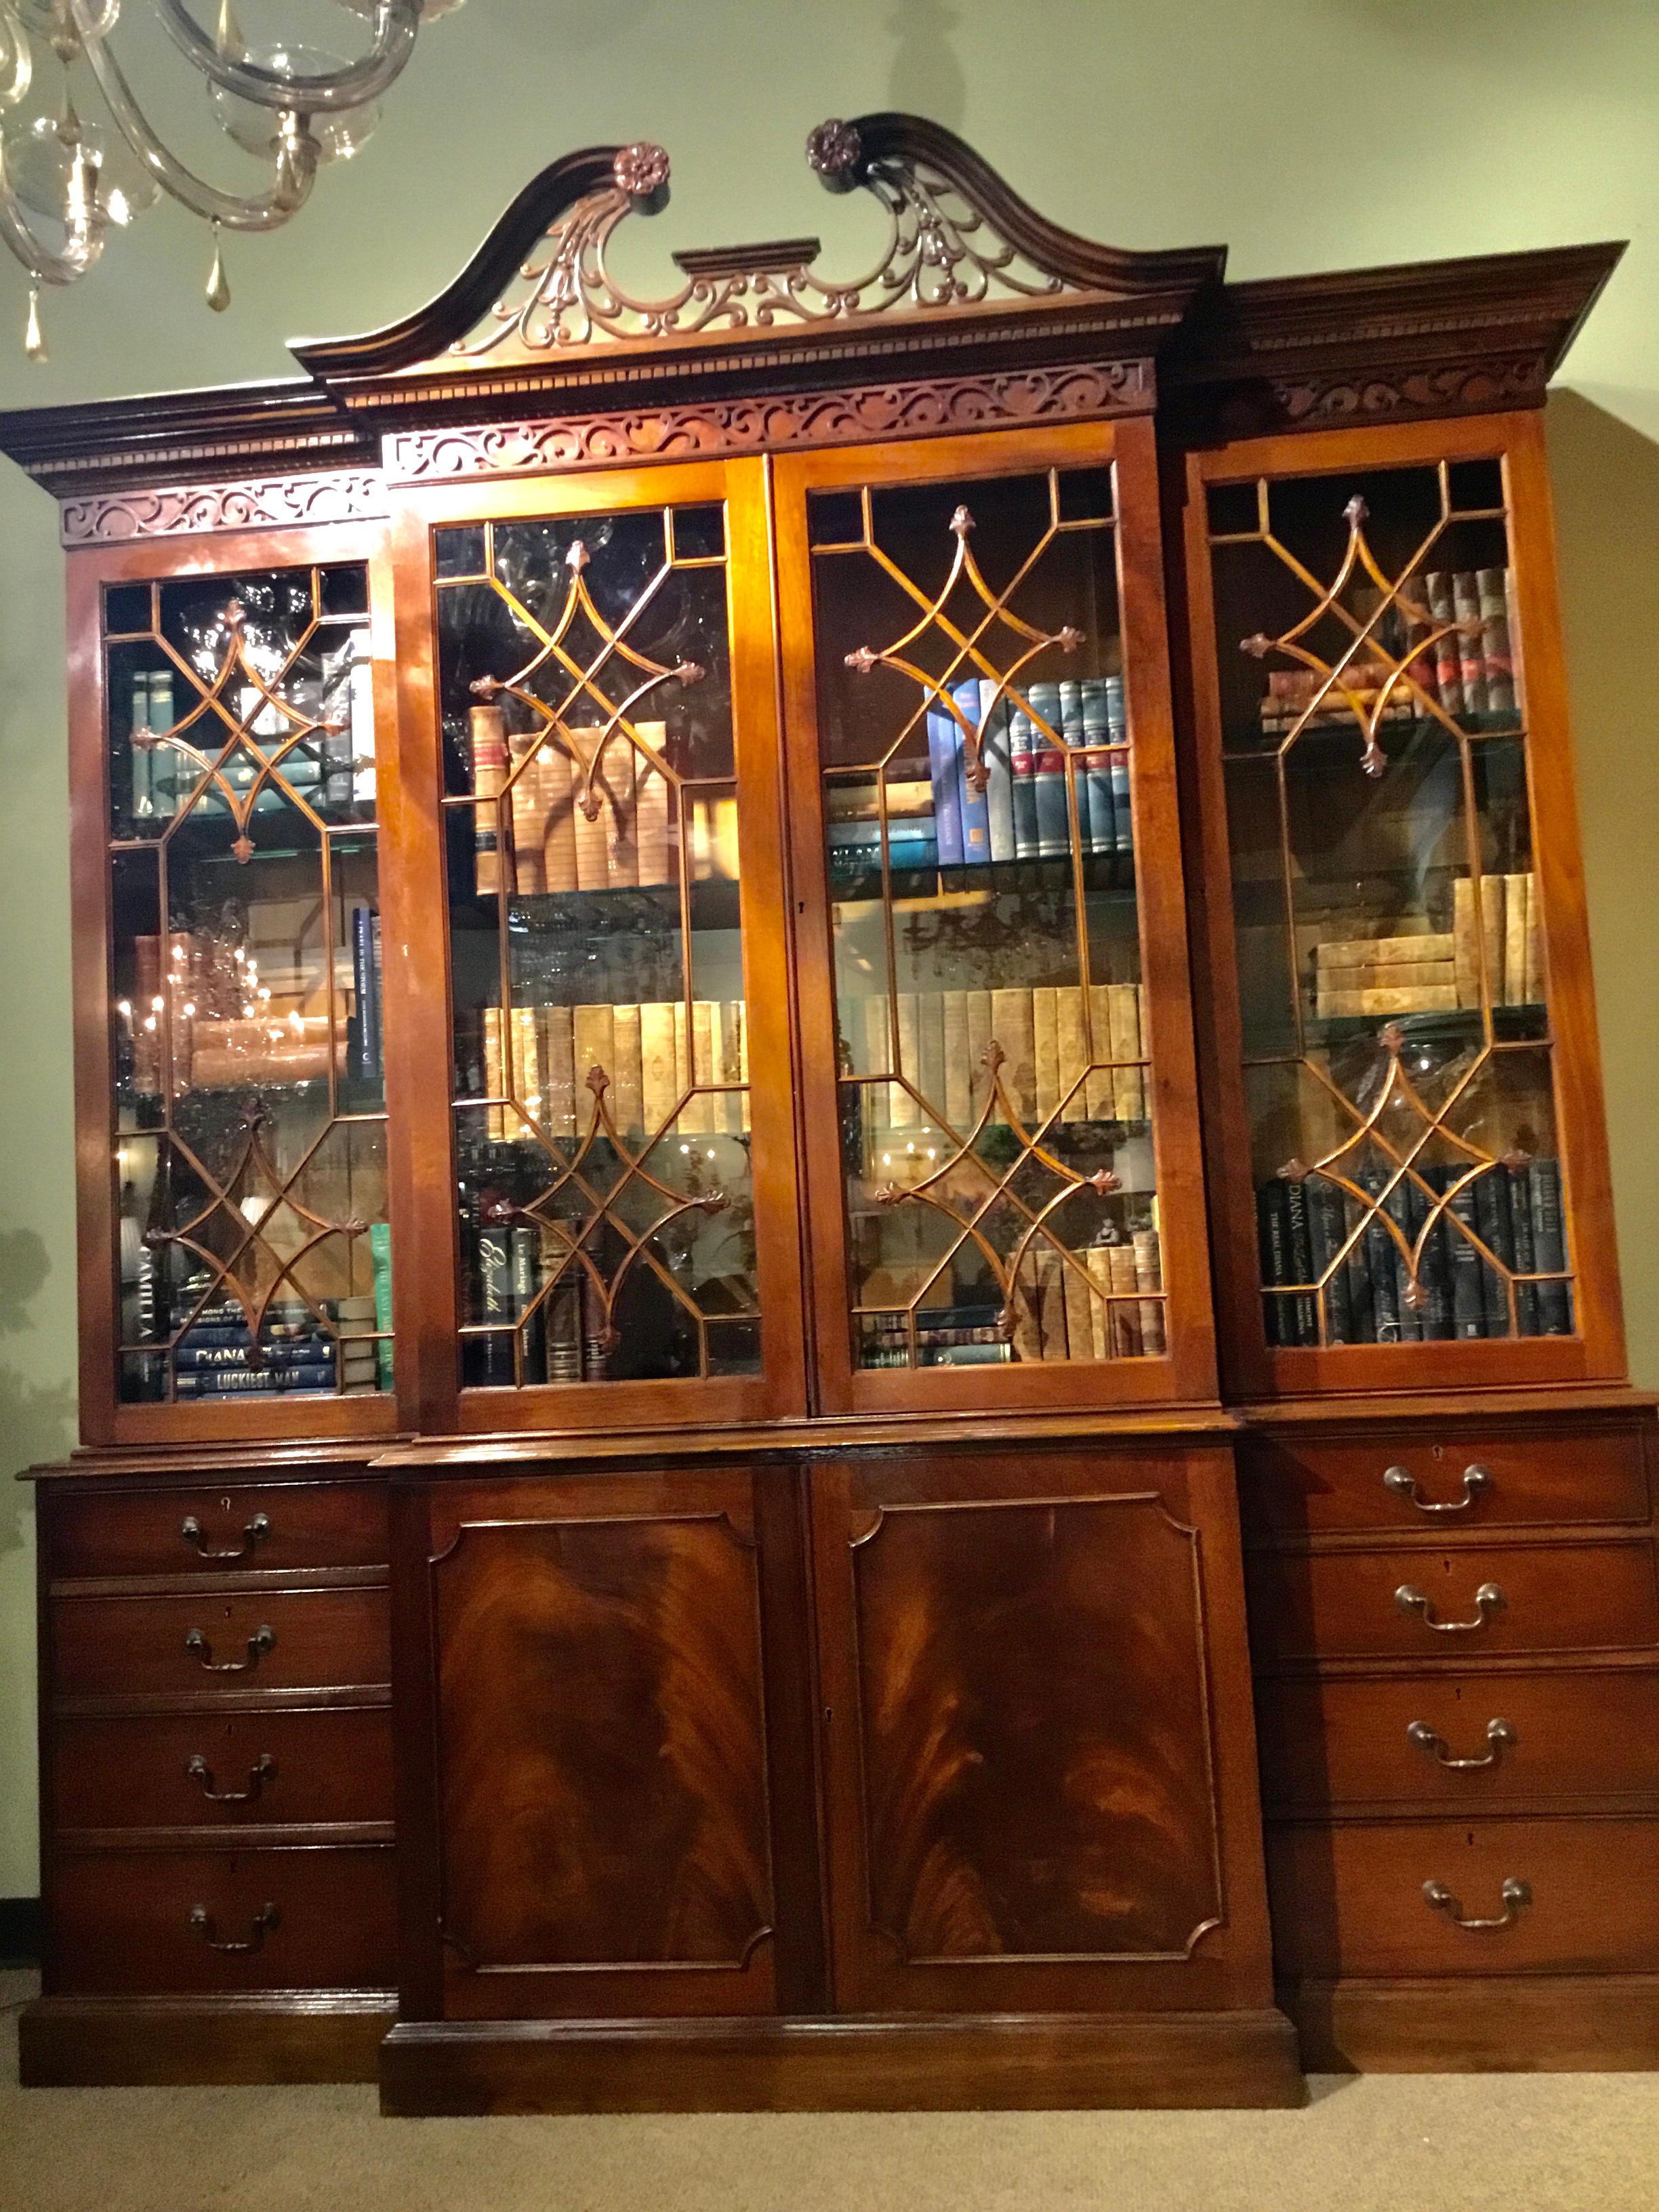 Handsome Chippendale style breakfront/ bookcase crafted of flame mahogany
with a superb swans neck and filigree pediment. The dentil cornice atop a carved
Blind-fret frieze and glazed doors with shaped astragal moldings having carved
fleur-de-lis